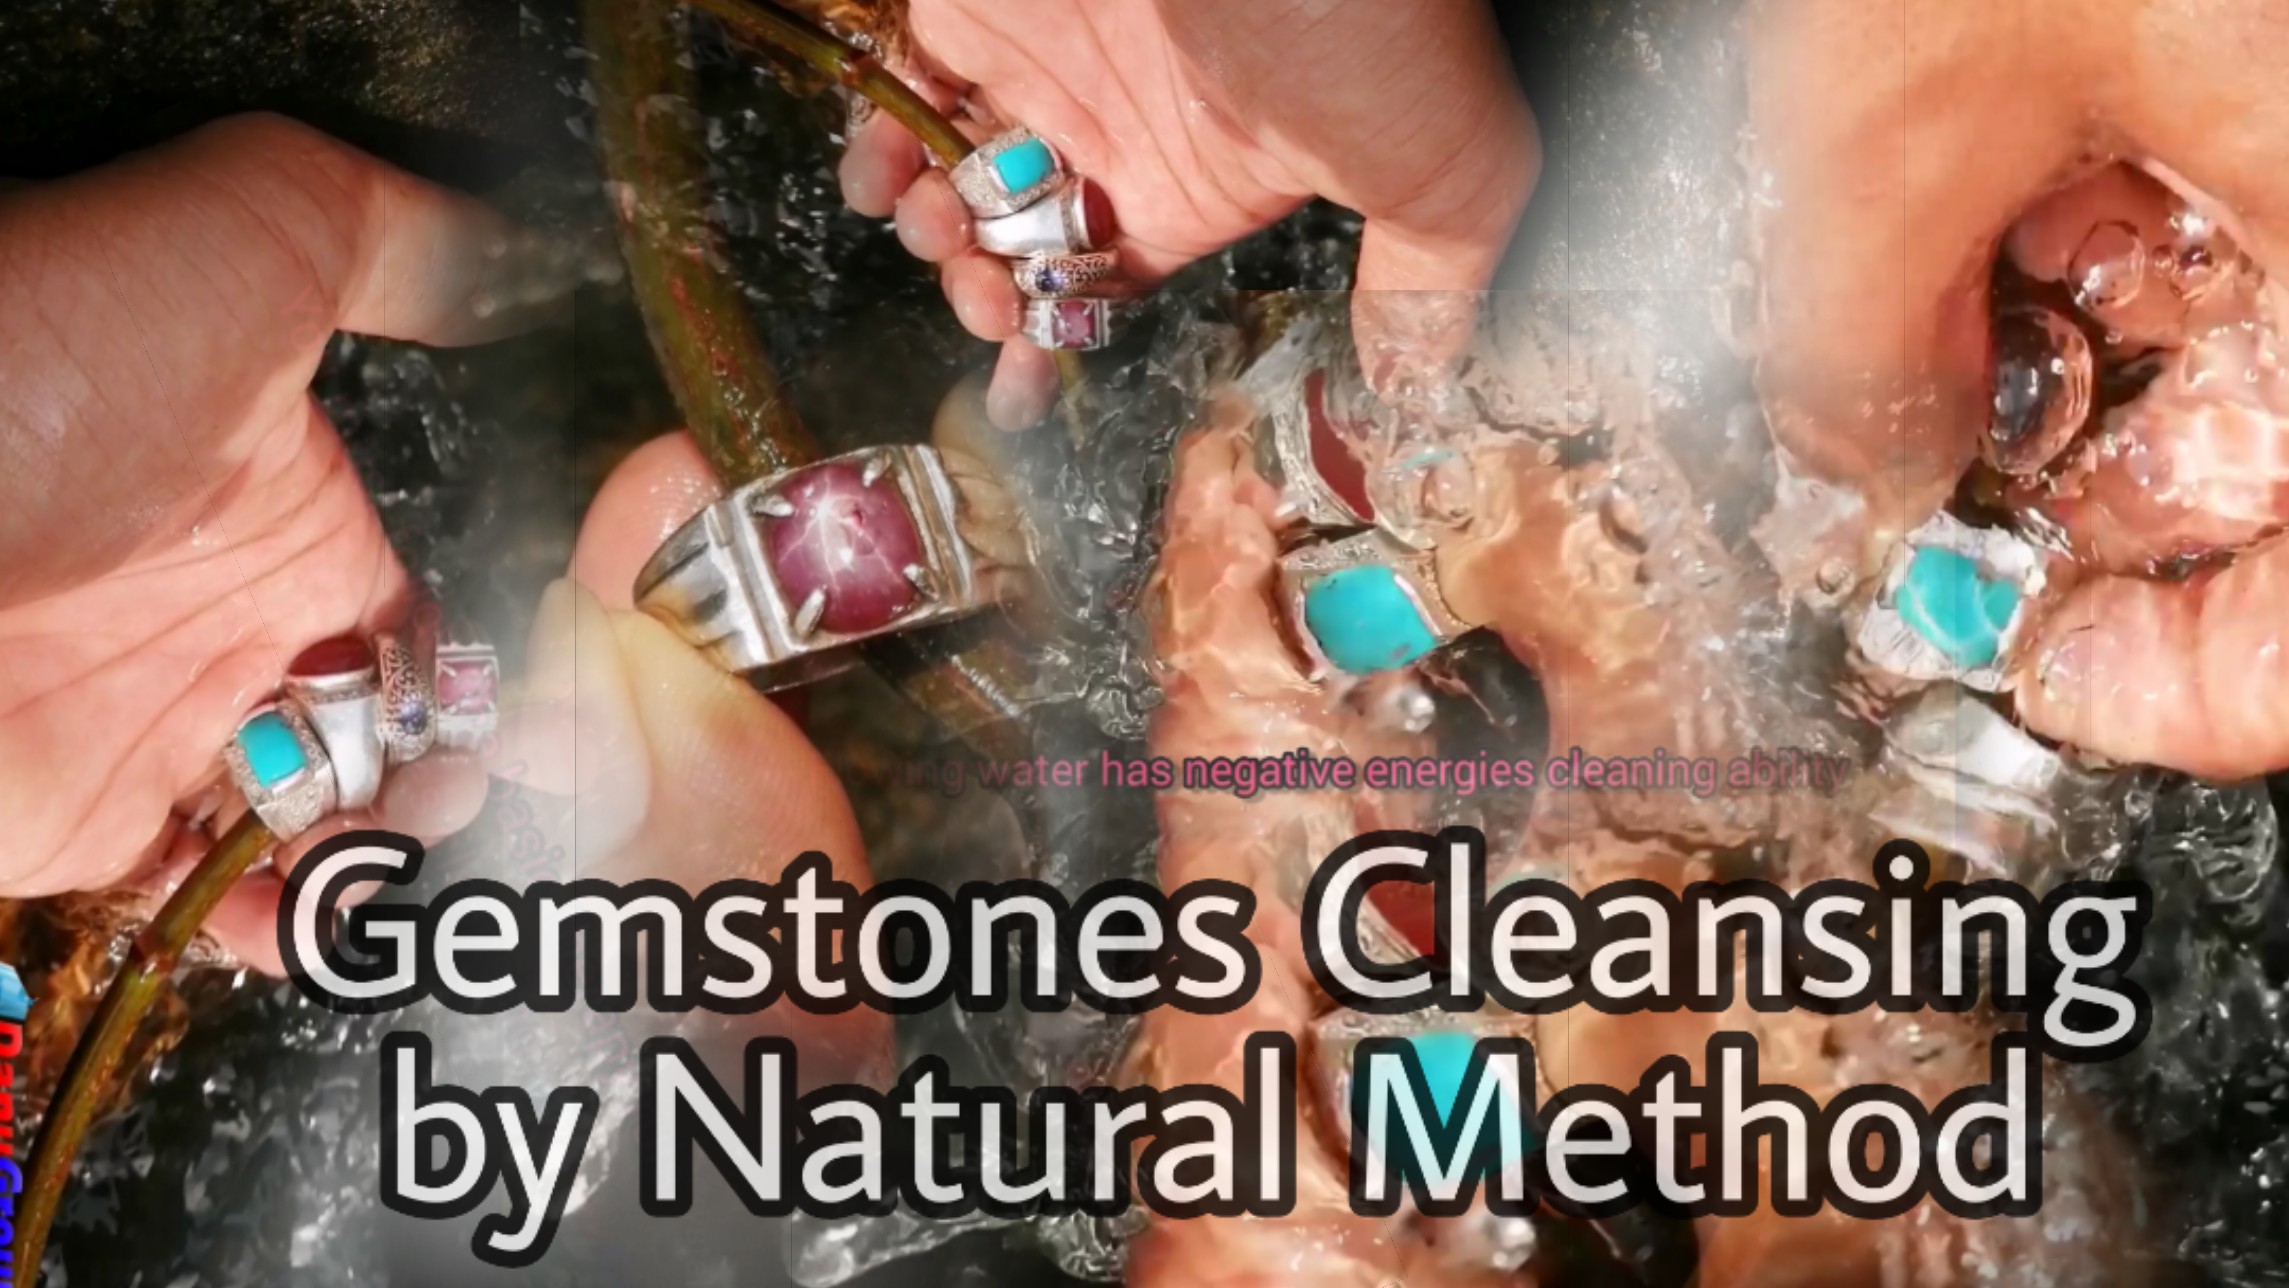 Gemstones Cleansing by Natural Method - Flowing water has negative energy cleaning ability